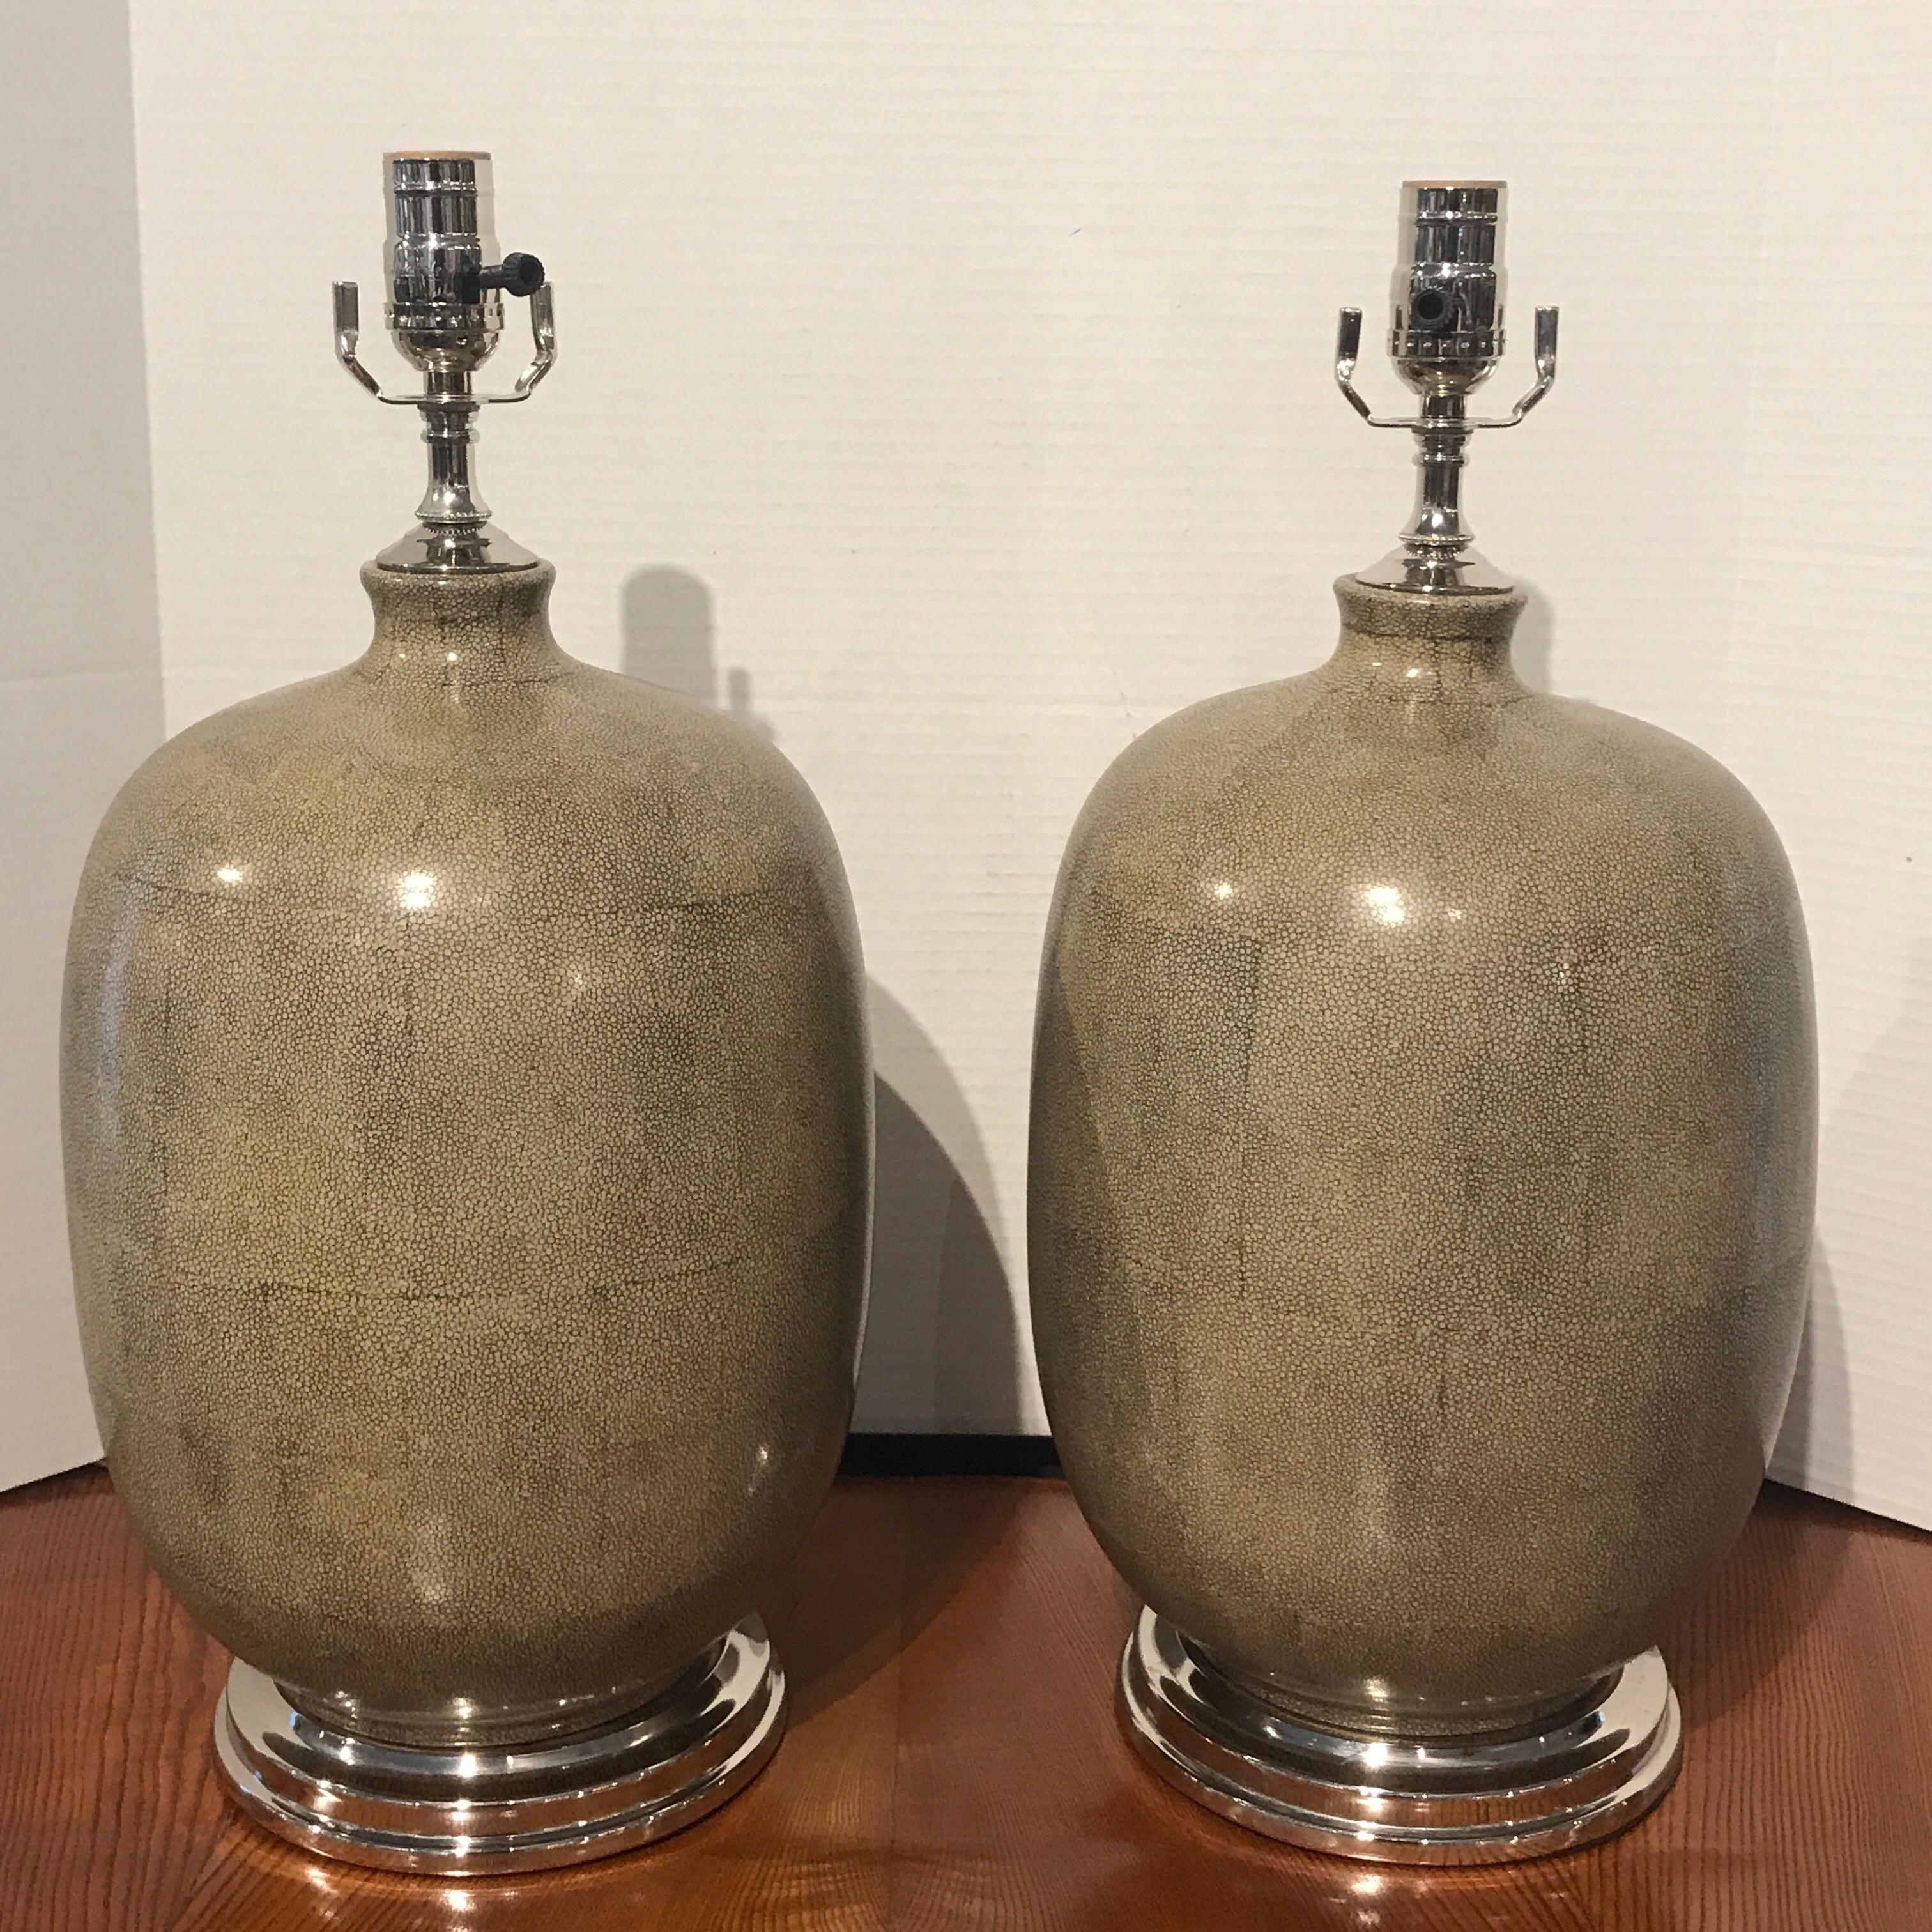 Pair of Shagreen porcelain vases now as lamps, finely painted with bookmatched shagreen pattern, with silver plated mounts. New wiring. Each lamp stands 20